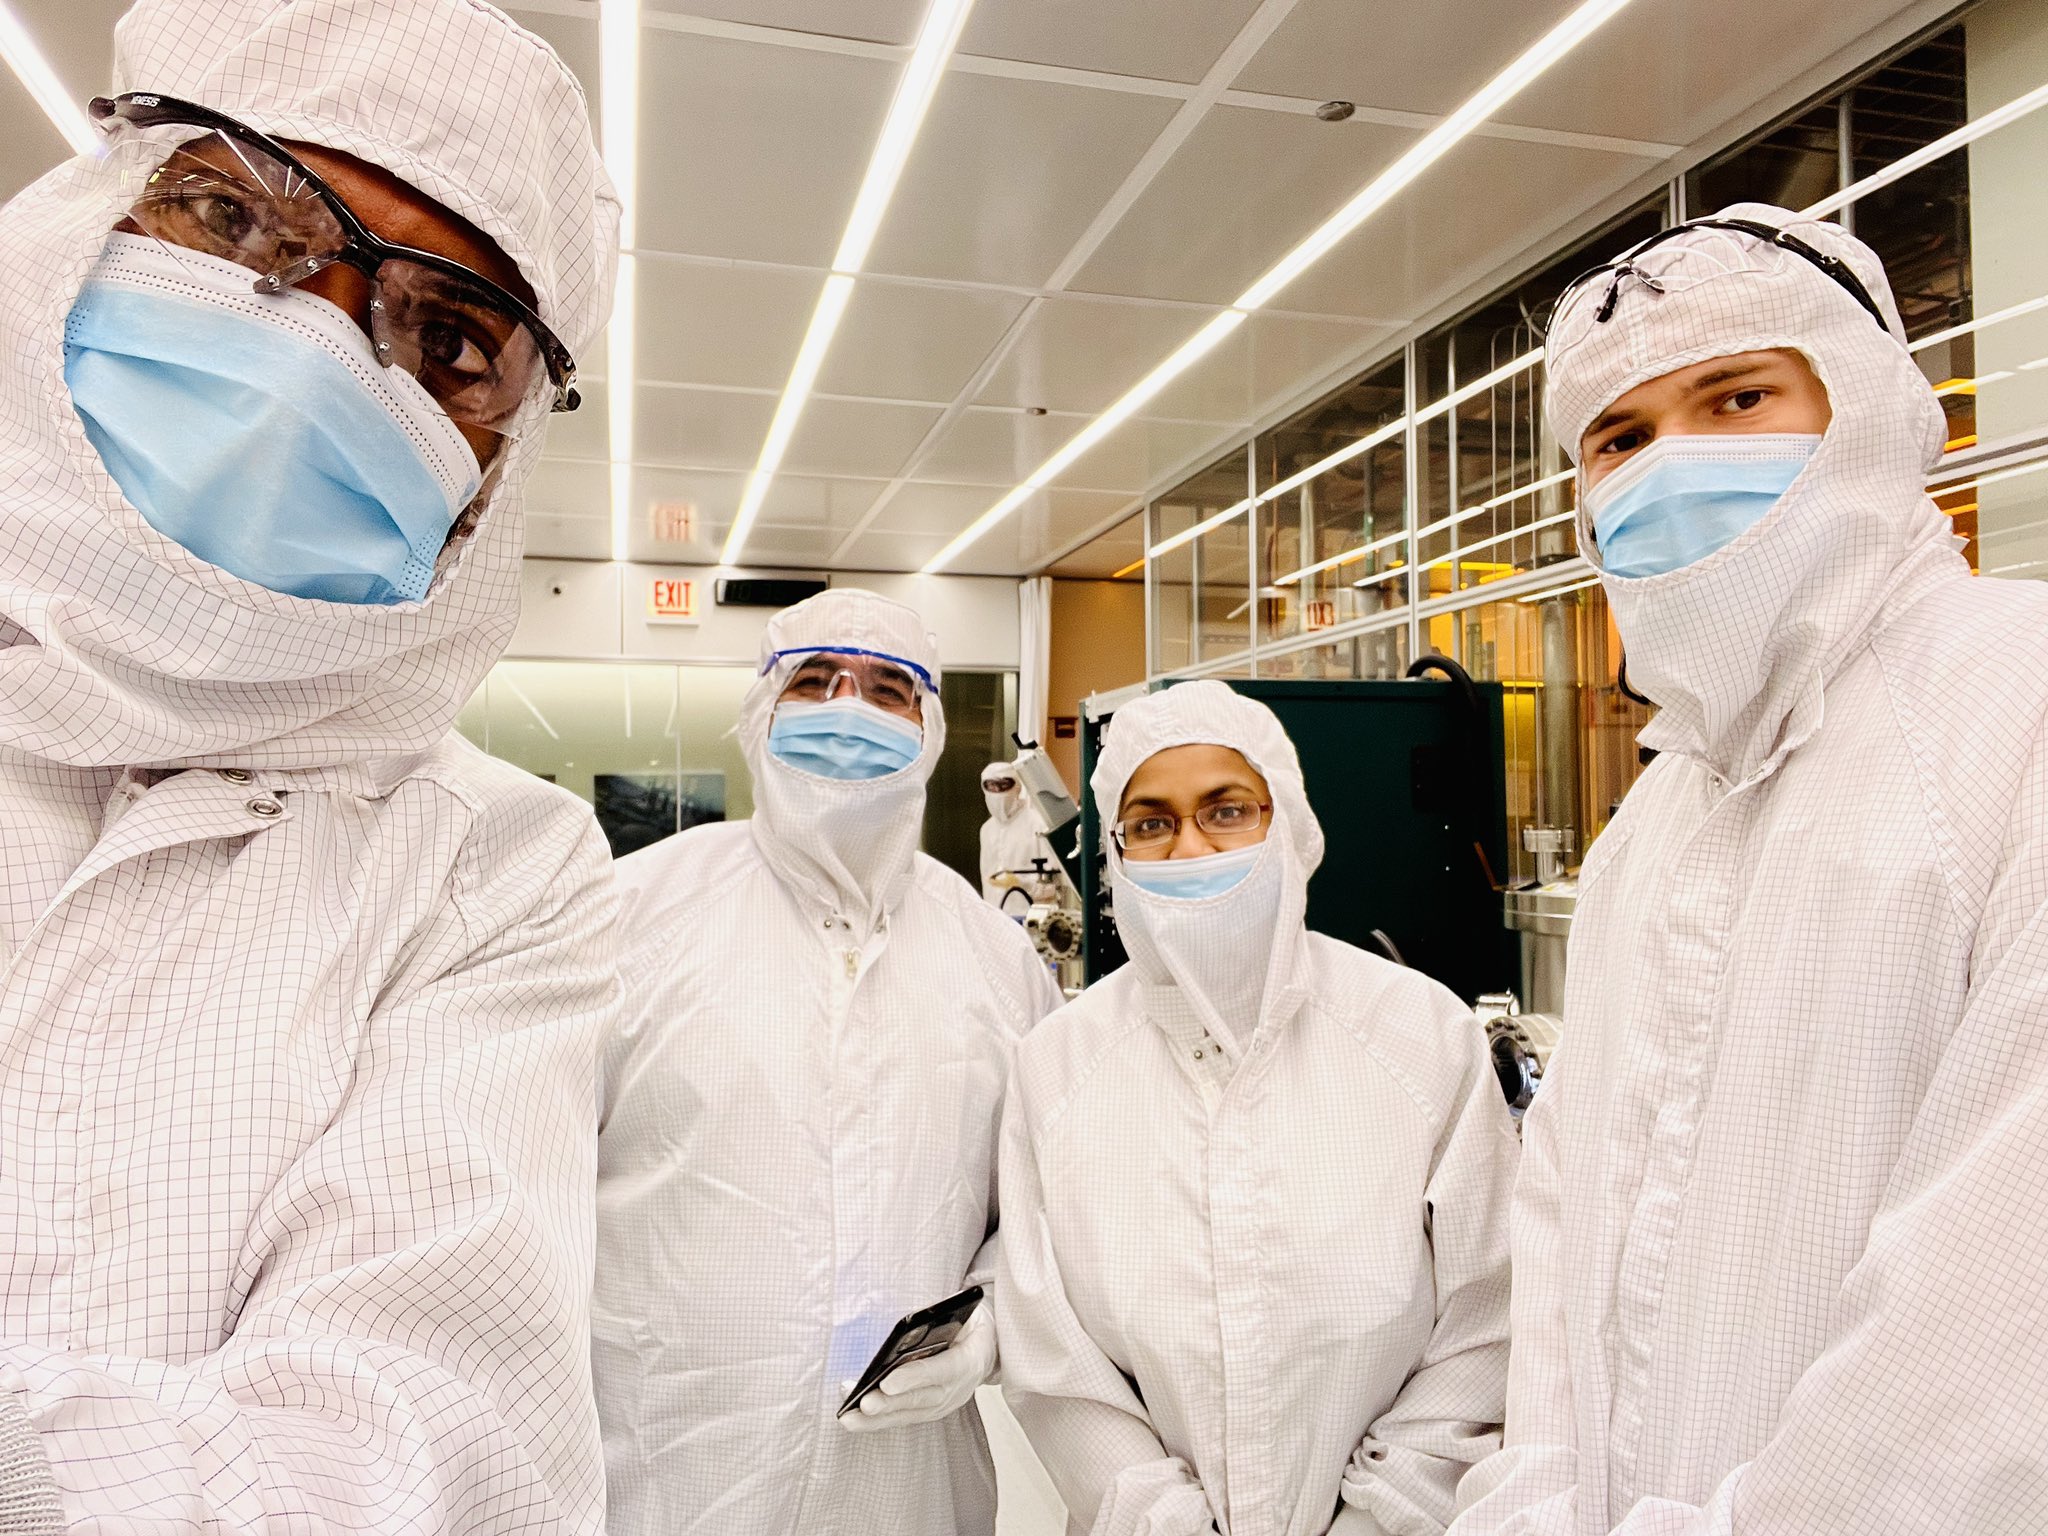 Four SQMS researchers covered head-to-toe in white bunny suits with blue surgical masks.